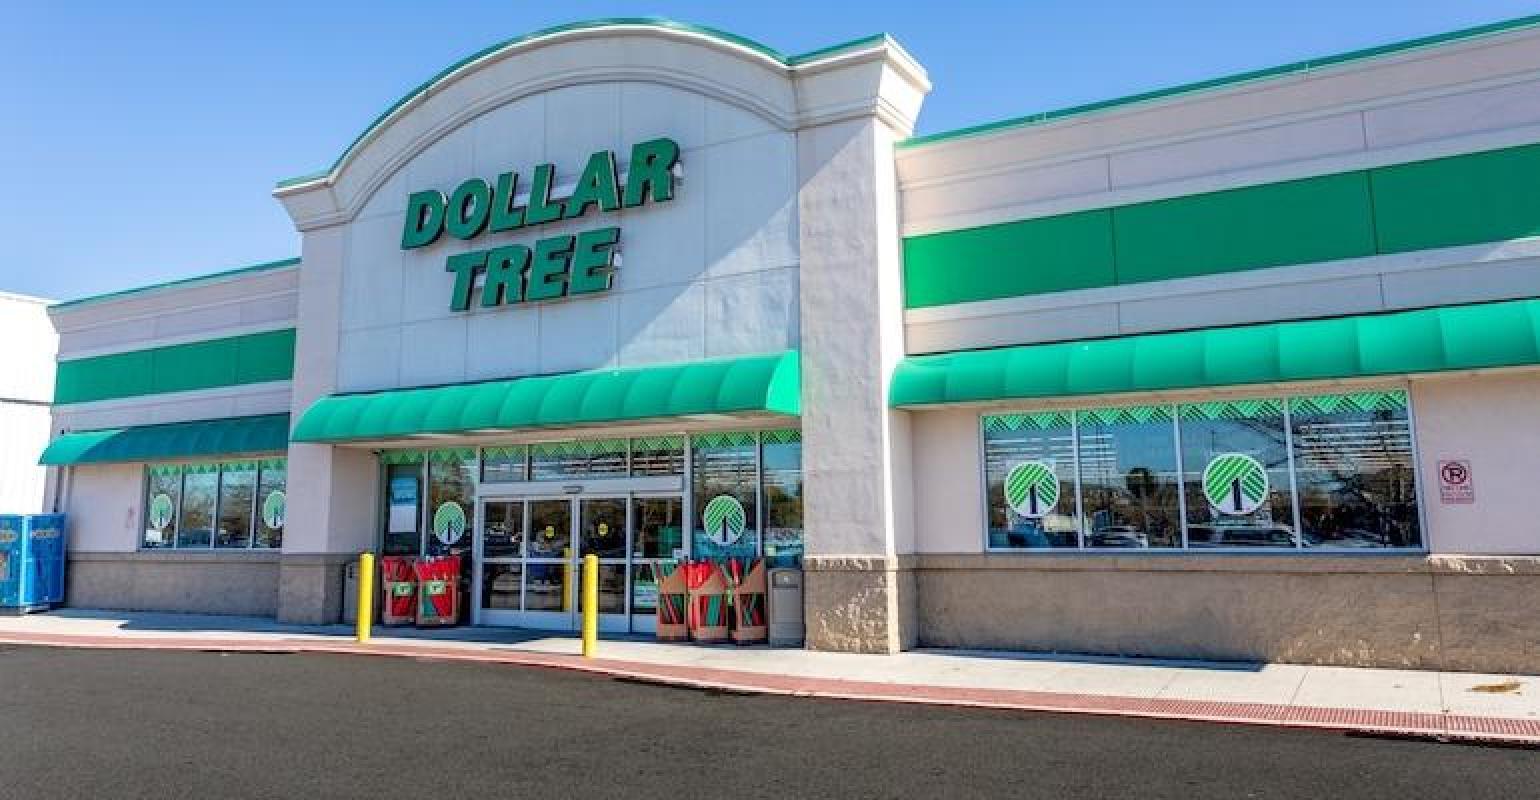 Doller Tree to let go about 90 employees